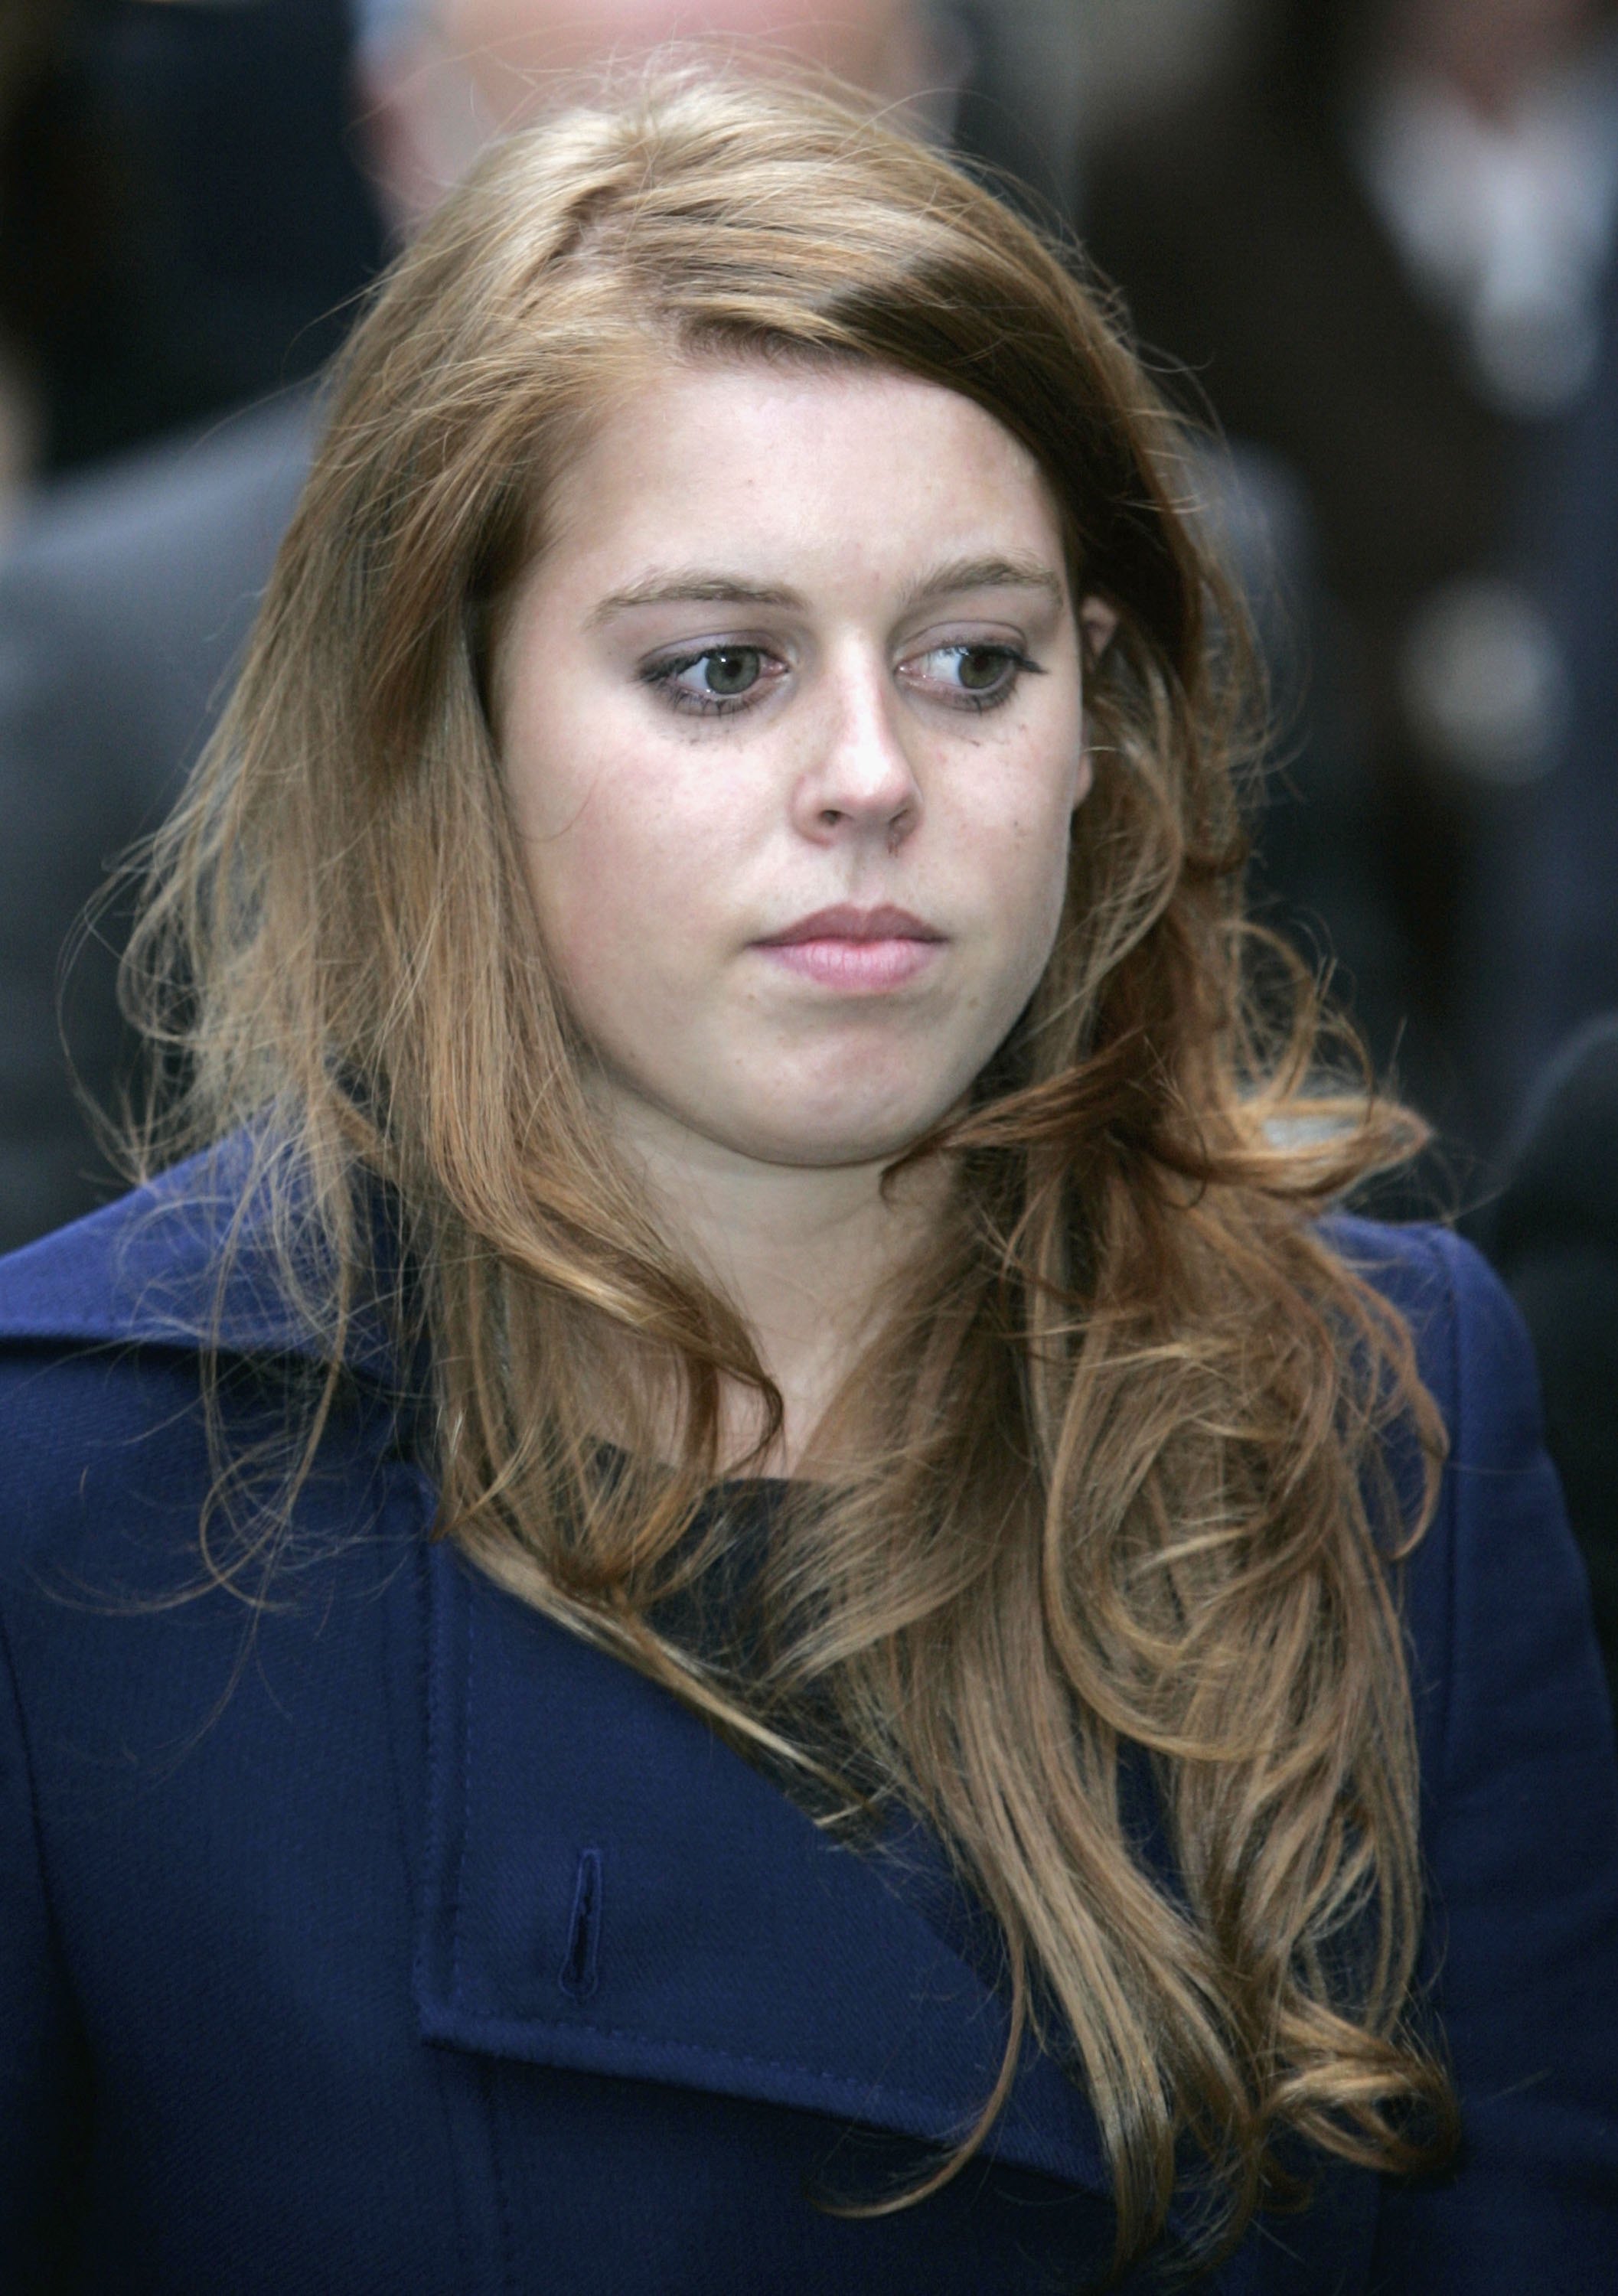 Princess Beatrice at the Thanksgiving Service for the life of James Wentworth-Stanley in London, England on January 9, 2007 | Source: Getty Images